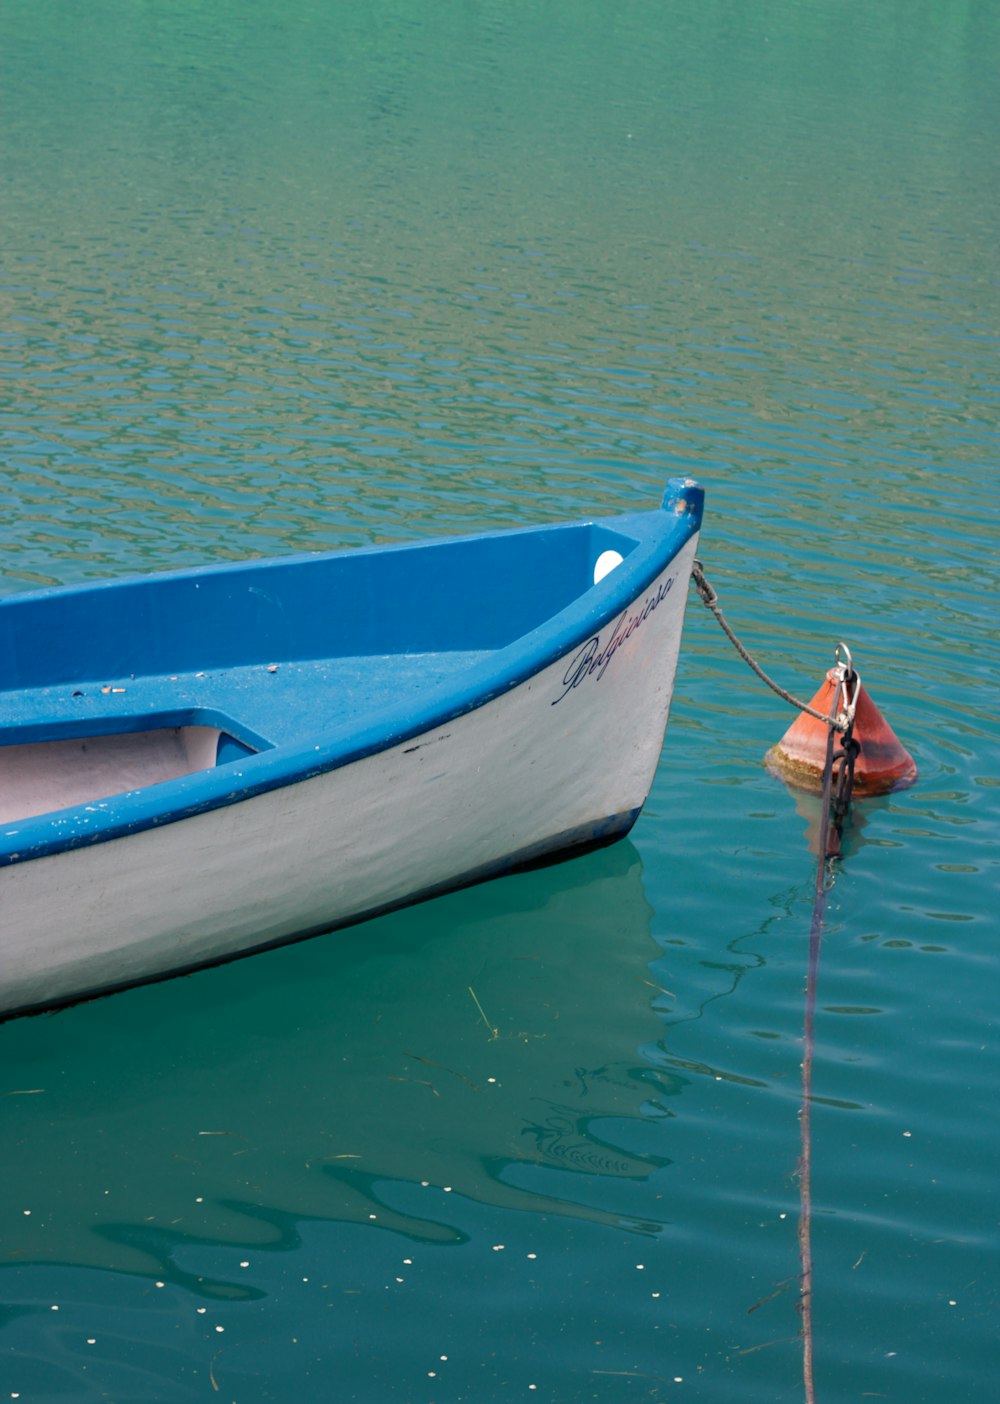 a blue and white boat tied to a pole in the water